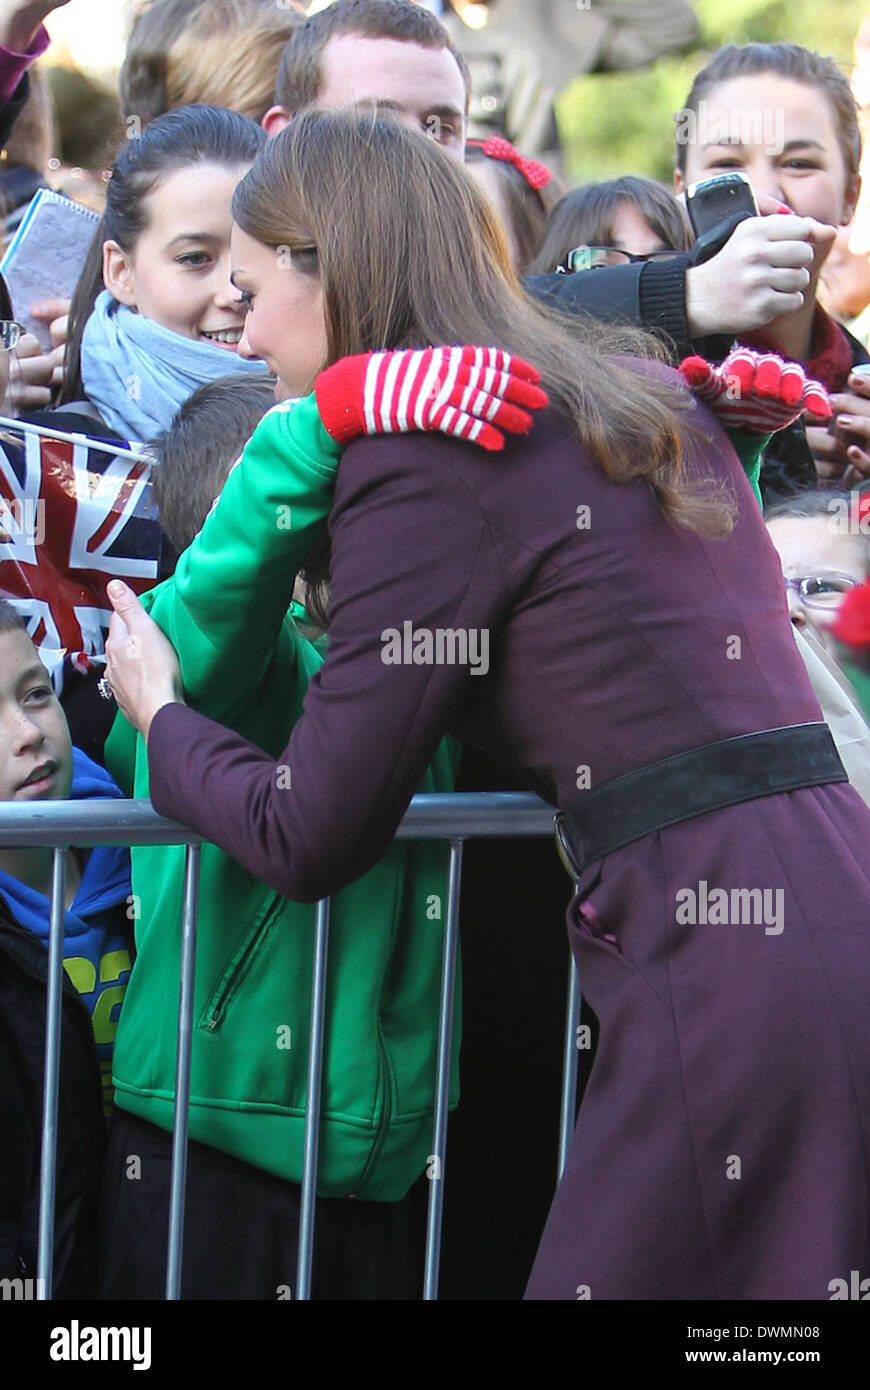 Catherine Duchess Of Cambridge Aka Kate Middleton Gives A Hug To Young Boy While Leaving The Newcastle Civic Centre Newcastle England 10 10 12 Featuring Catherine Duchess Of Cambridge Aka Kate Middleton Where